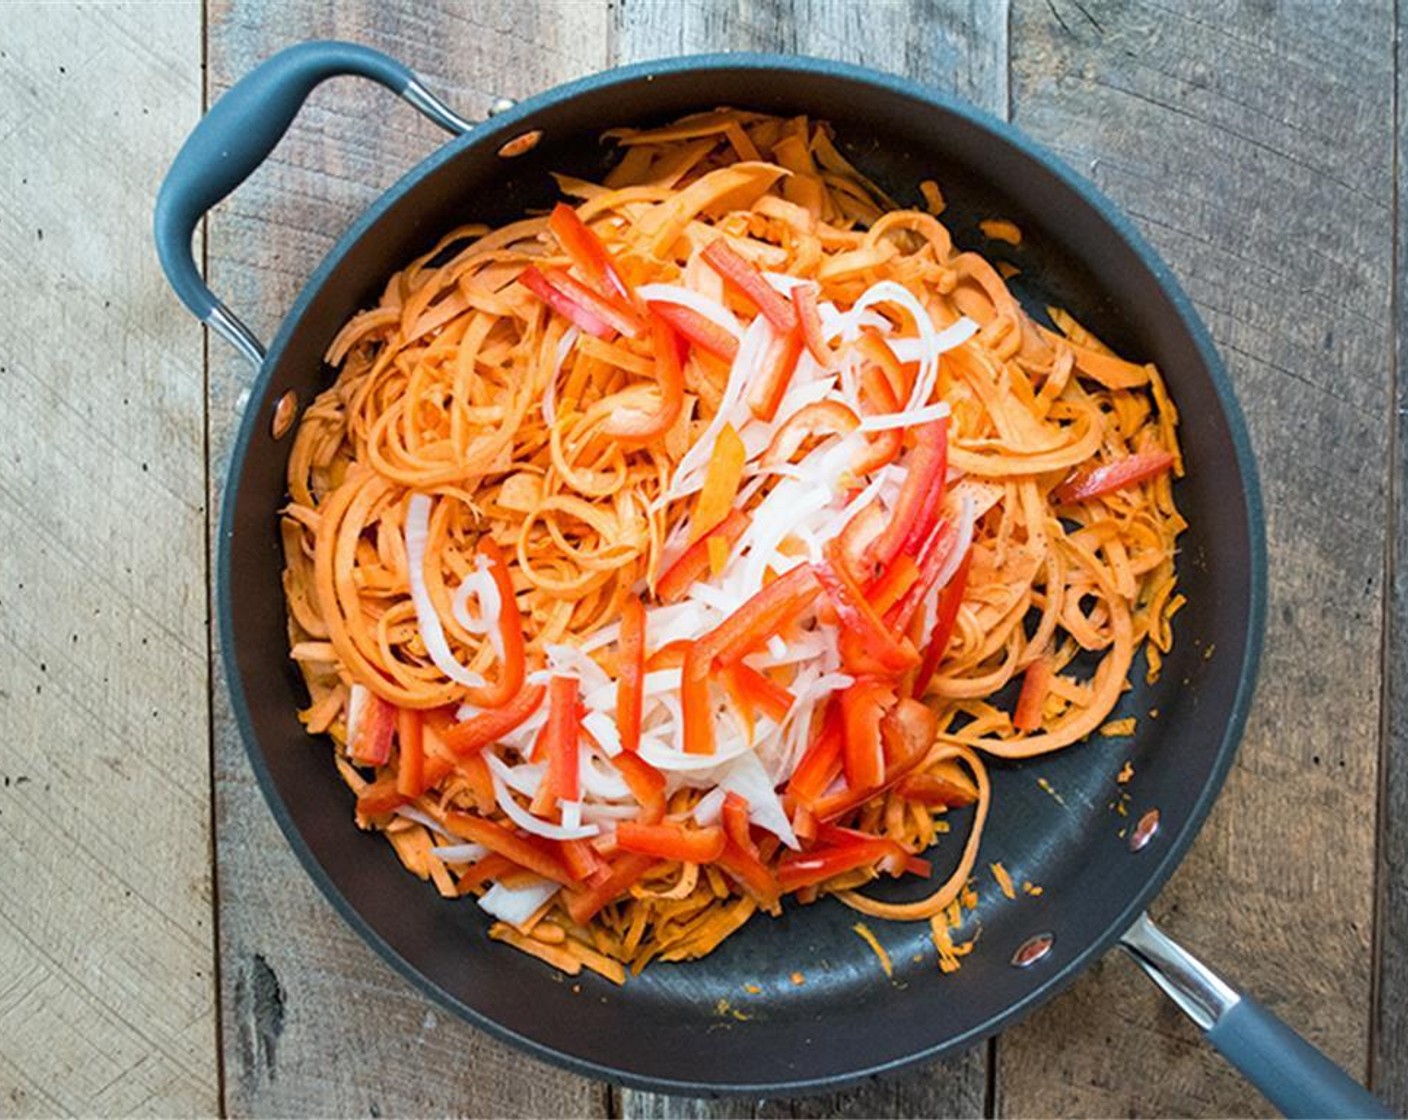 step 6 Add sliced red bell pepper and onion to the pan and cook an additional 5-7 minutes or until veggies are tender, similar to the texture of cooked pasta.